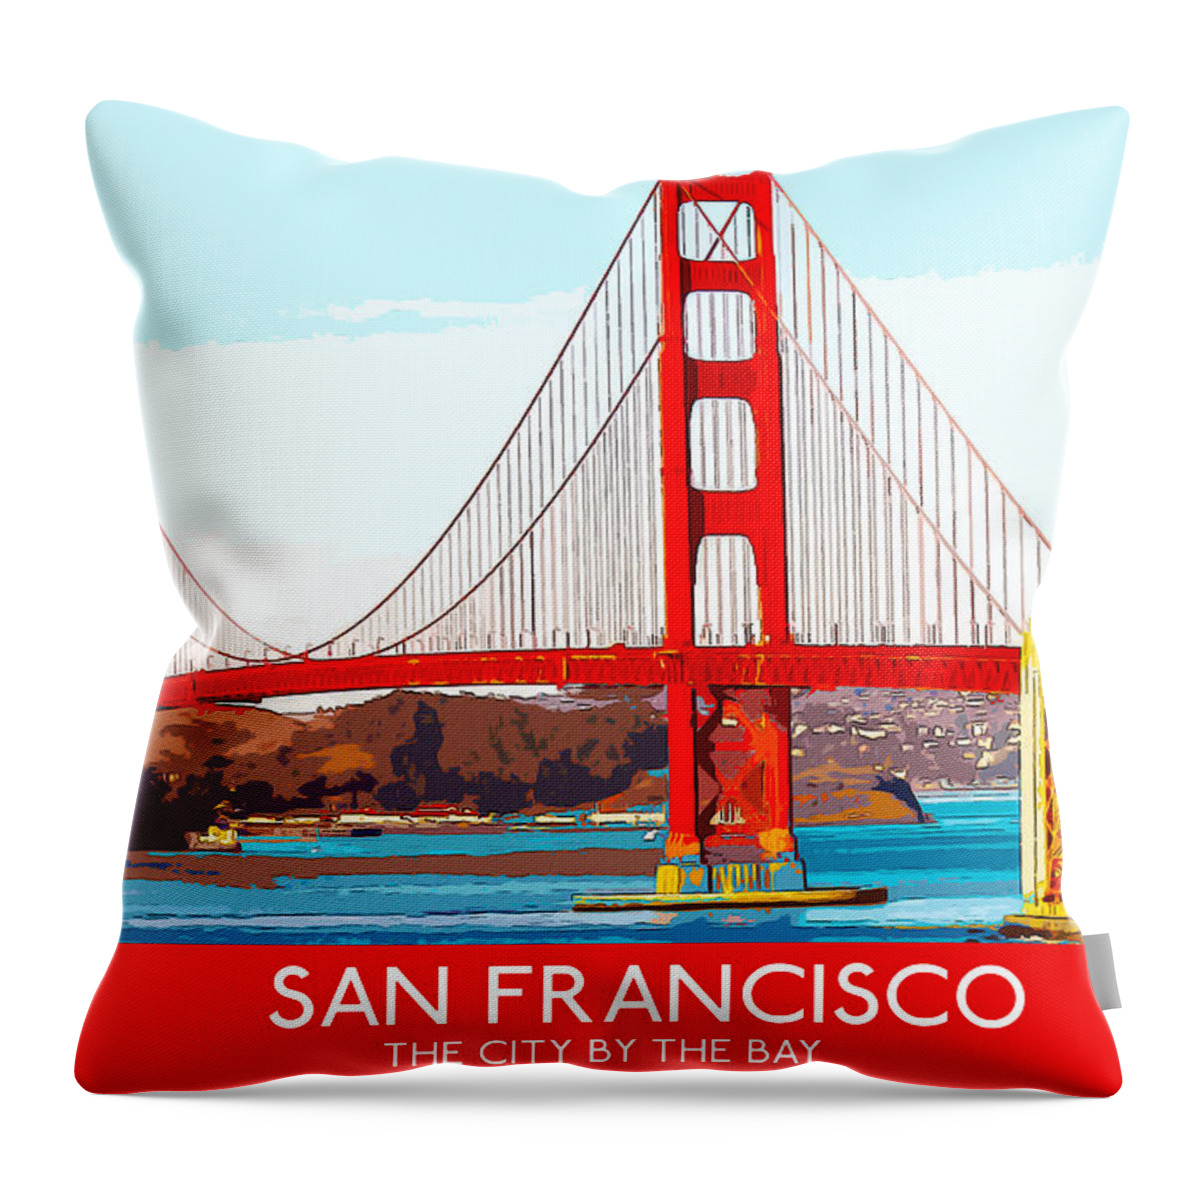 Architecture Throw Pillow featuring the digital art Golden Gate Bridge San Francisco The City By The Bay by Anthony Murphy